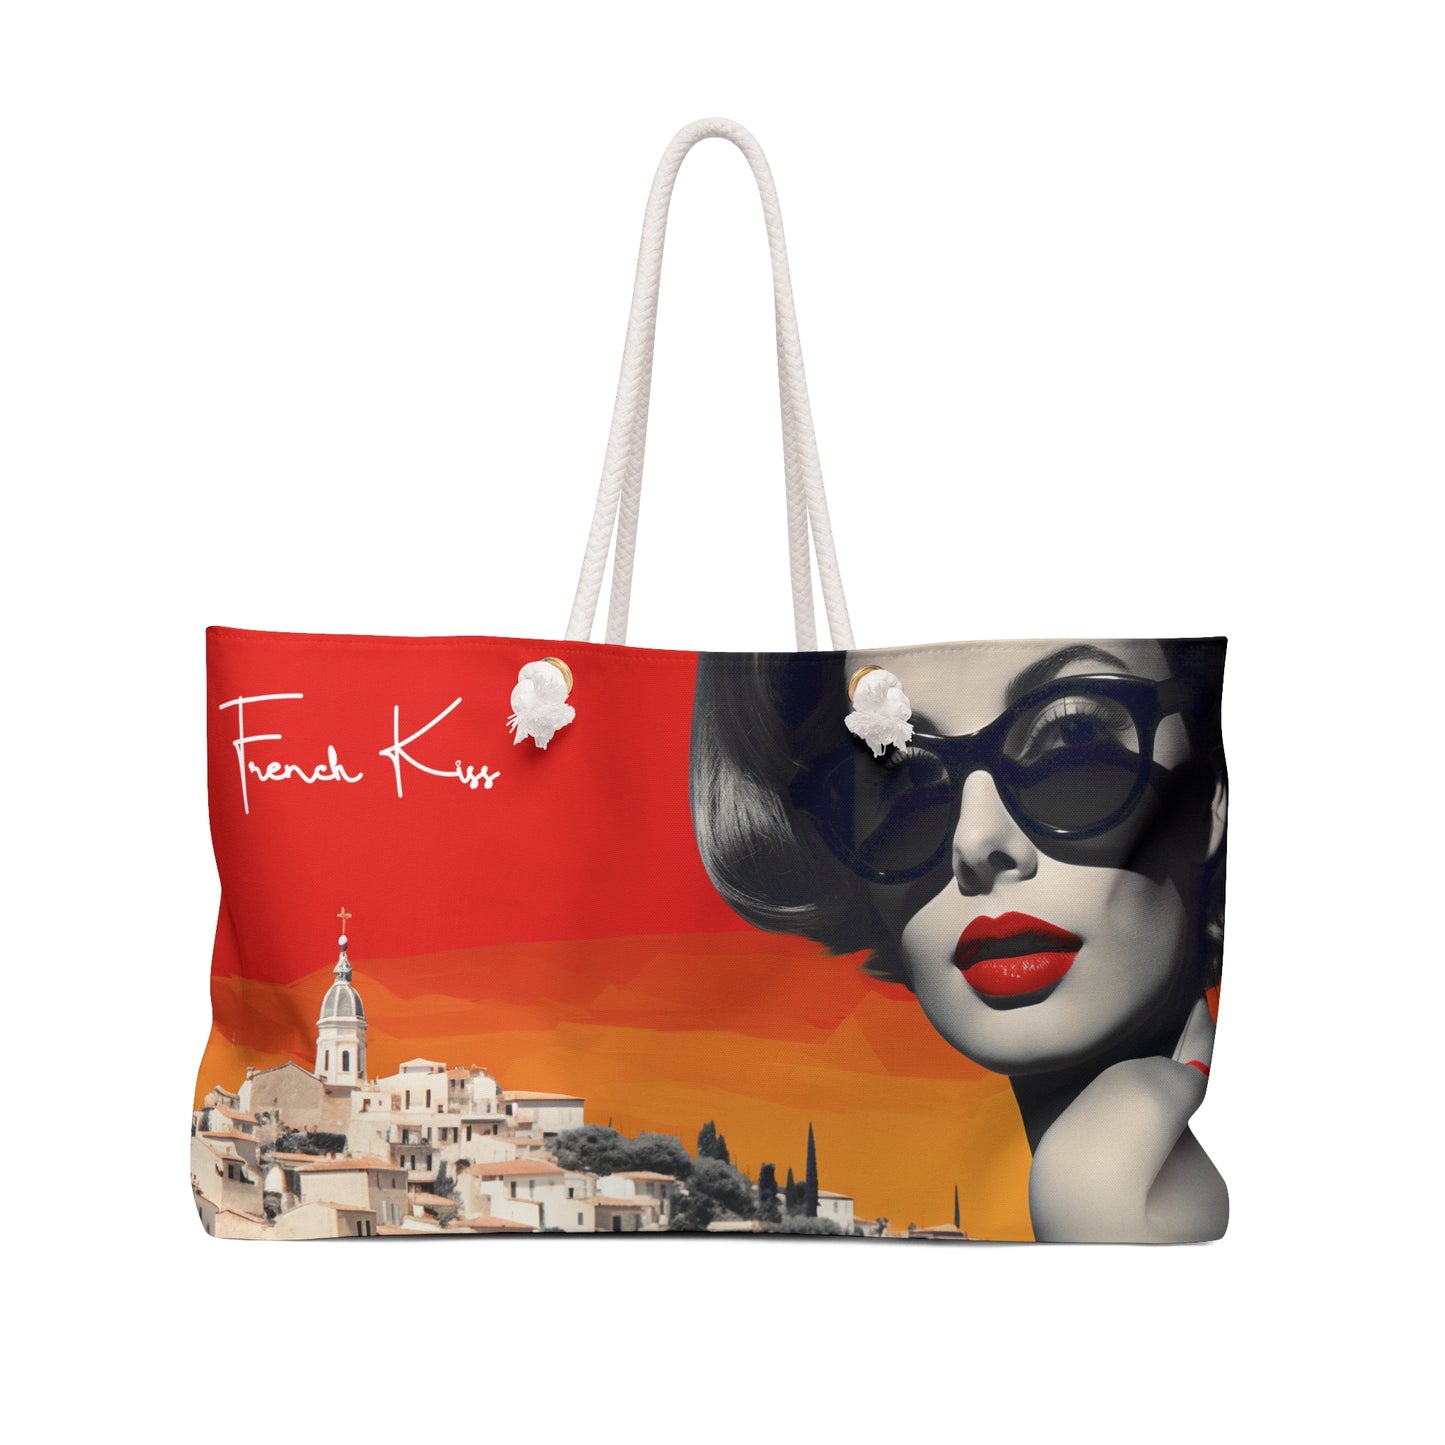 TOUT EN ROUGE Sassy Sexy Chic Weekender Accessory Bag French Kiss Pop Art, Classy, Couture, Travel, Fashion, Beauty gift item